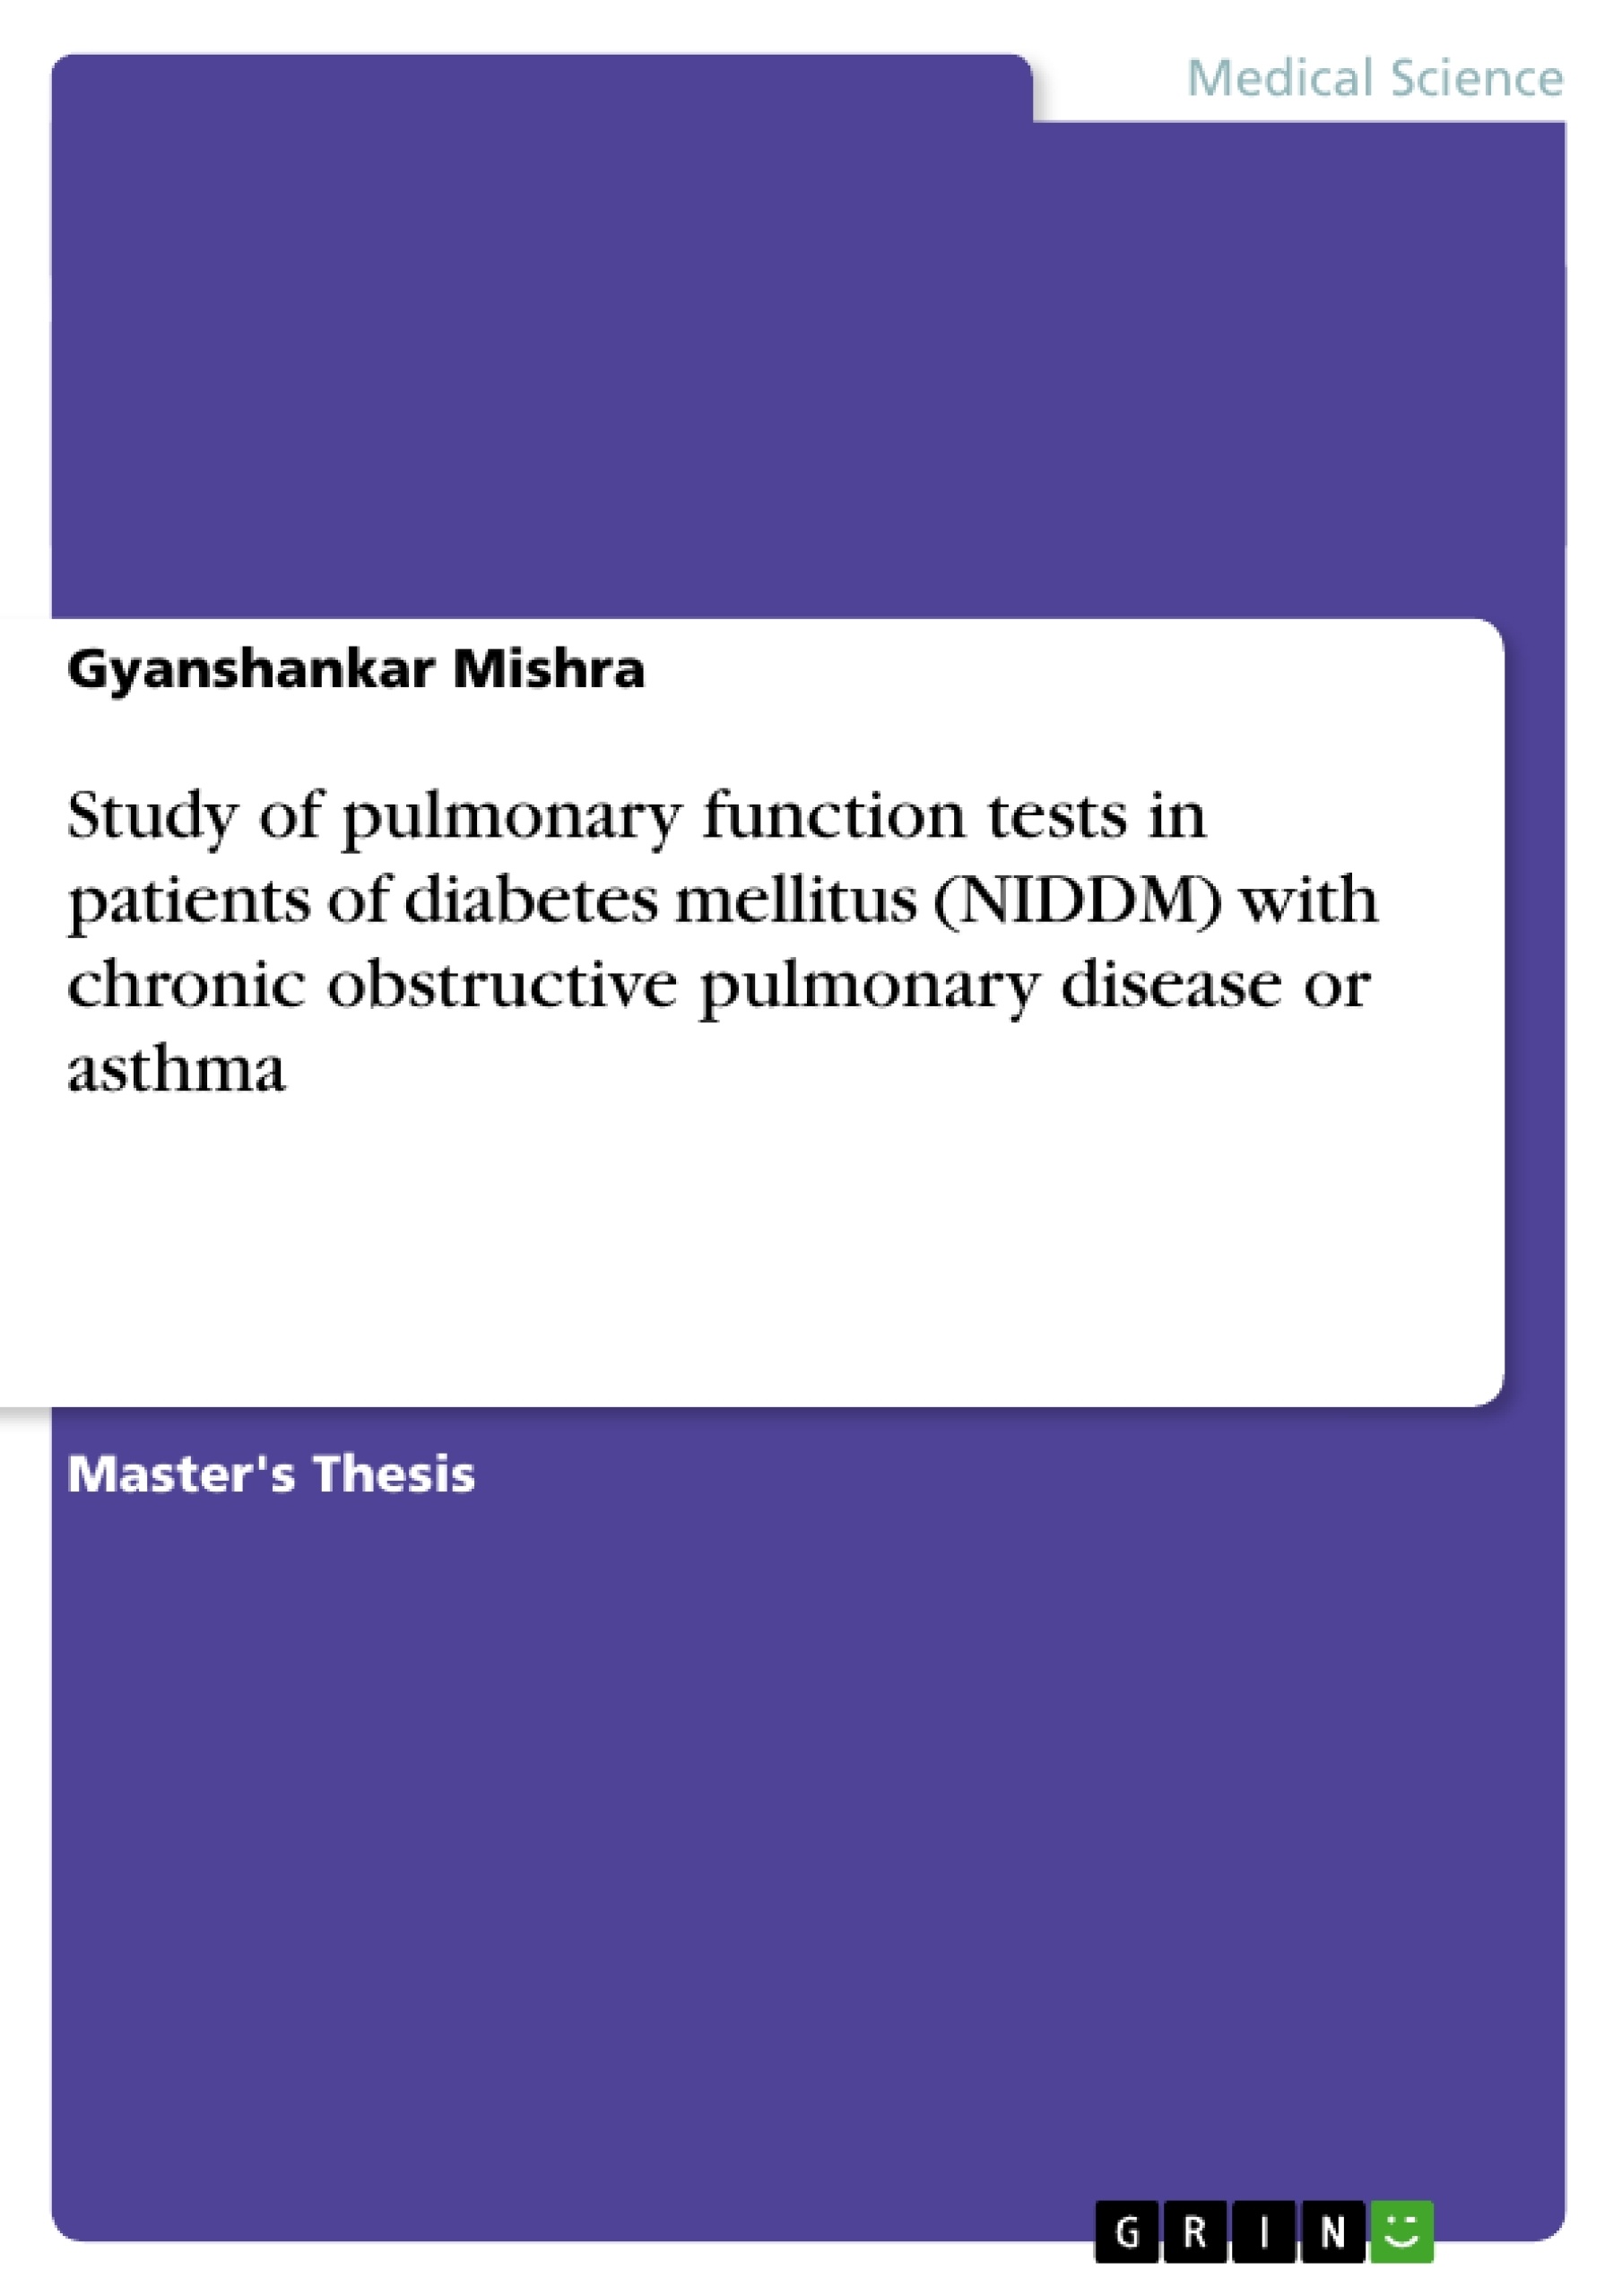 Title: Study of pulmonary function tests in patients of diabetes mellitus (NIDDM) with chronic obstructive pulmonary disease or asthma